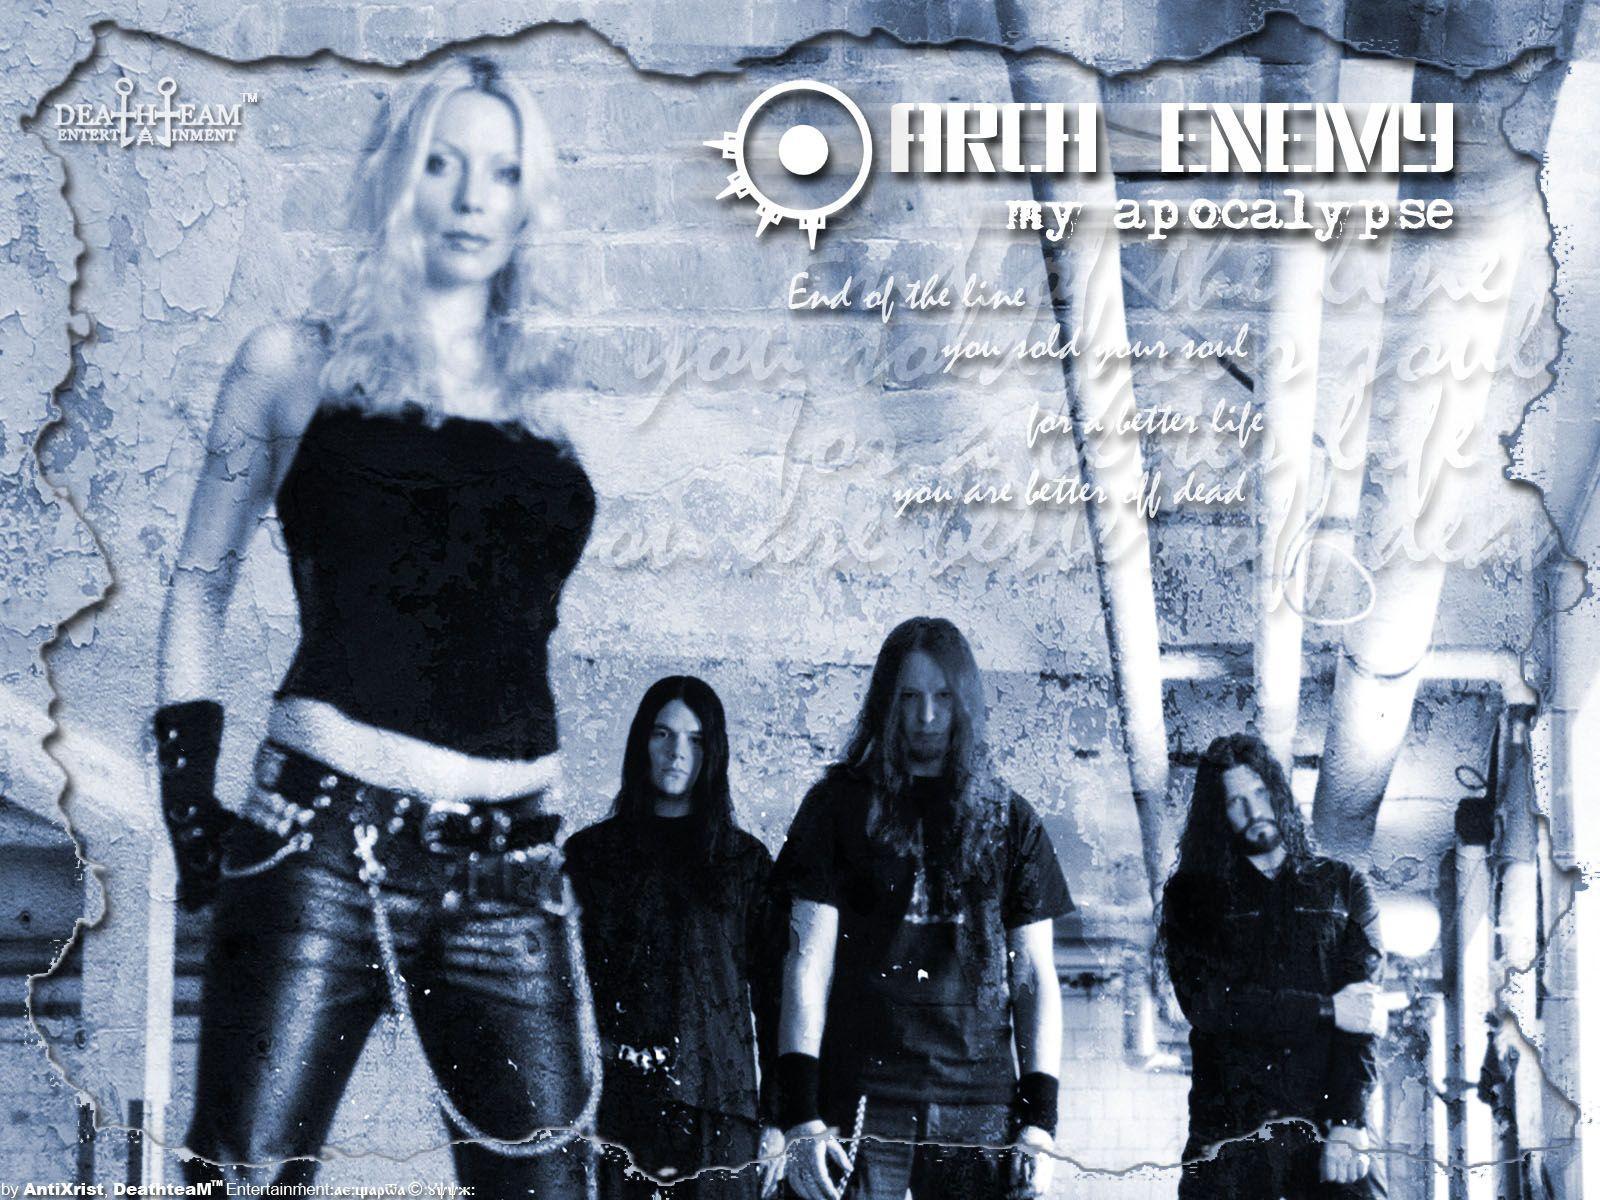 Arch Enemy wallpaper, picture, photo, image